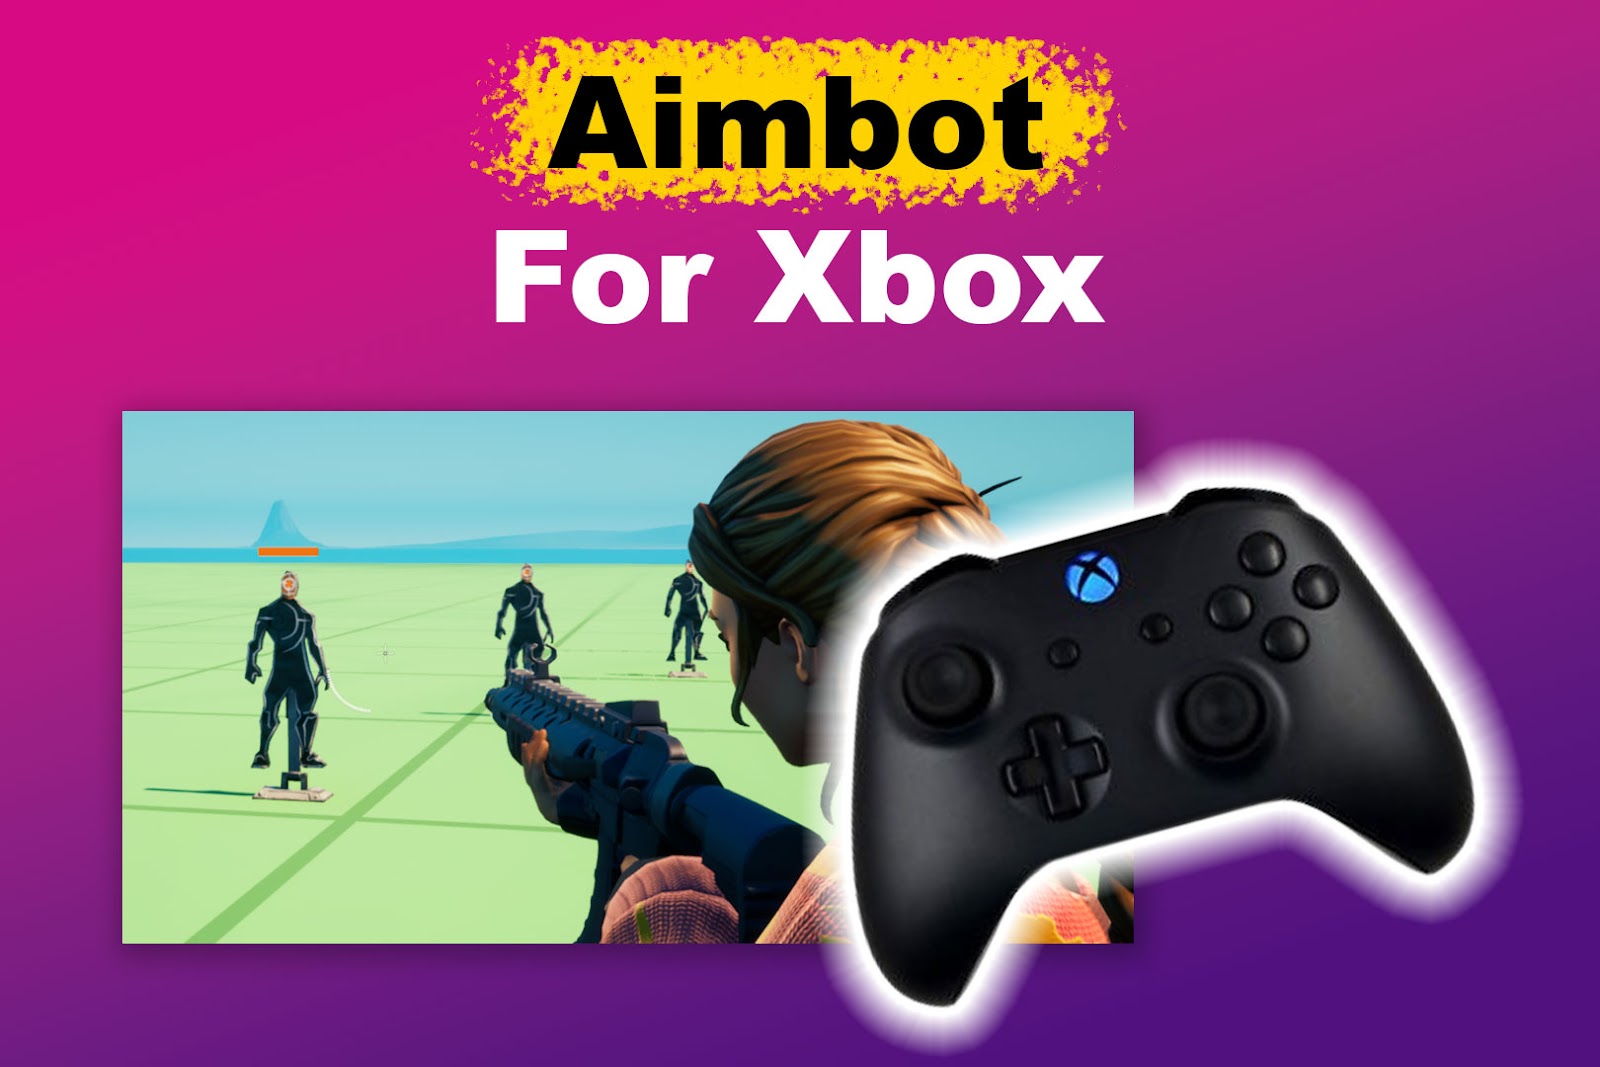 Using Aimbot for Xbox [Is it Legal? How to Install One]